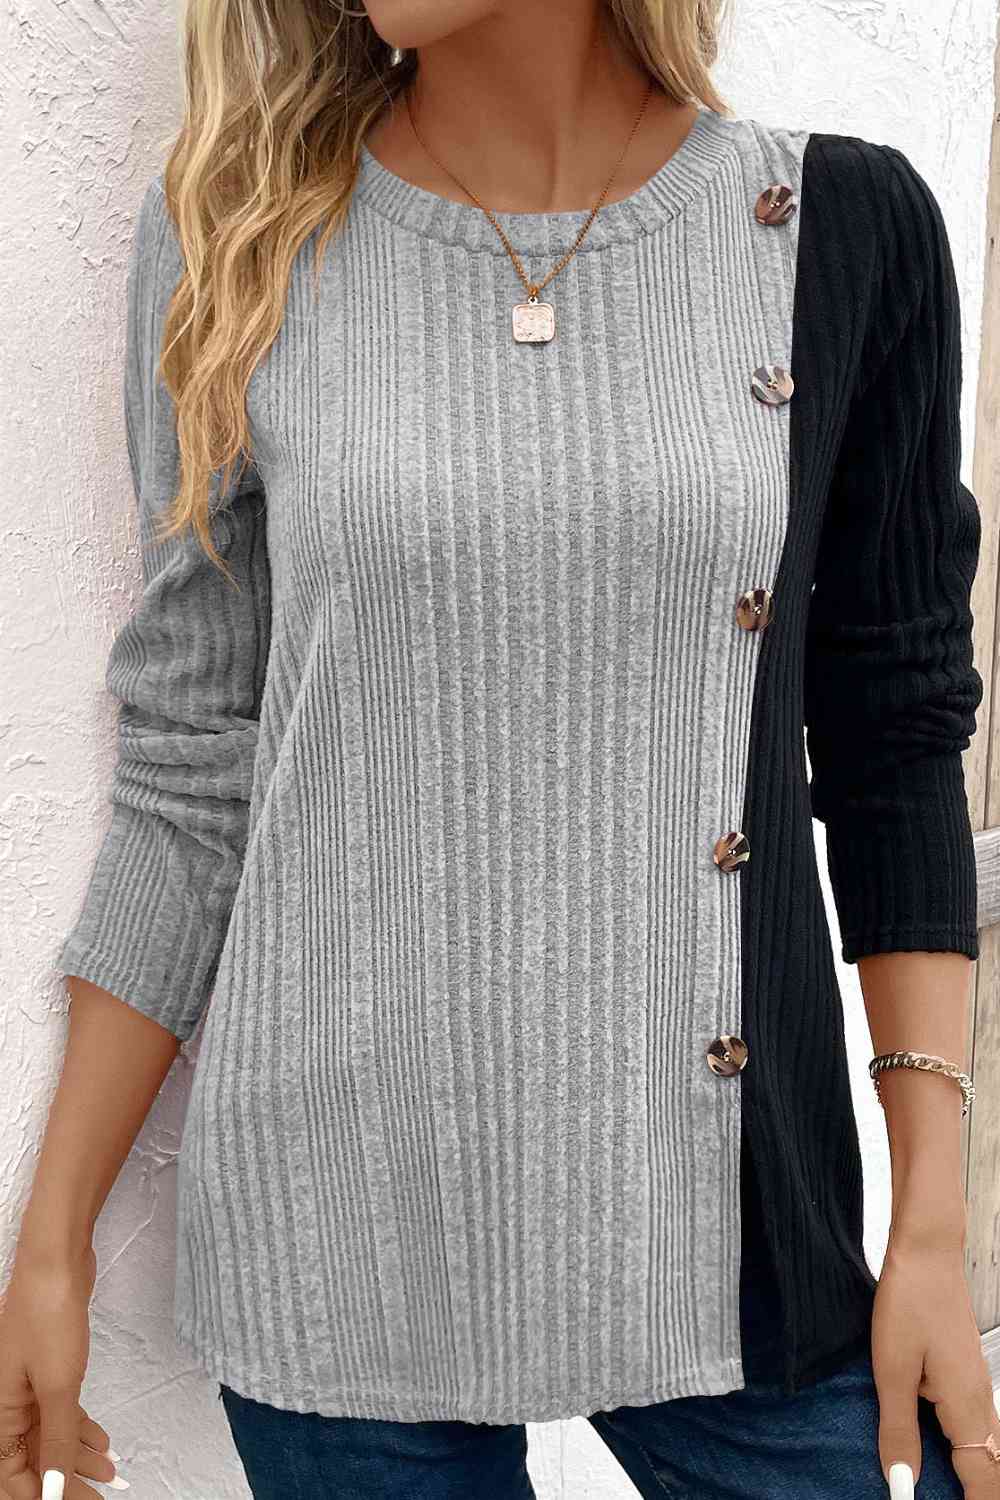 Contrast Color Long Sleeve Knit Top (6 Colors) Shirts & Tops Krazy Heart Designs Boutique Charcoal S 